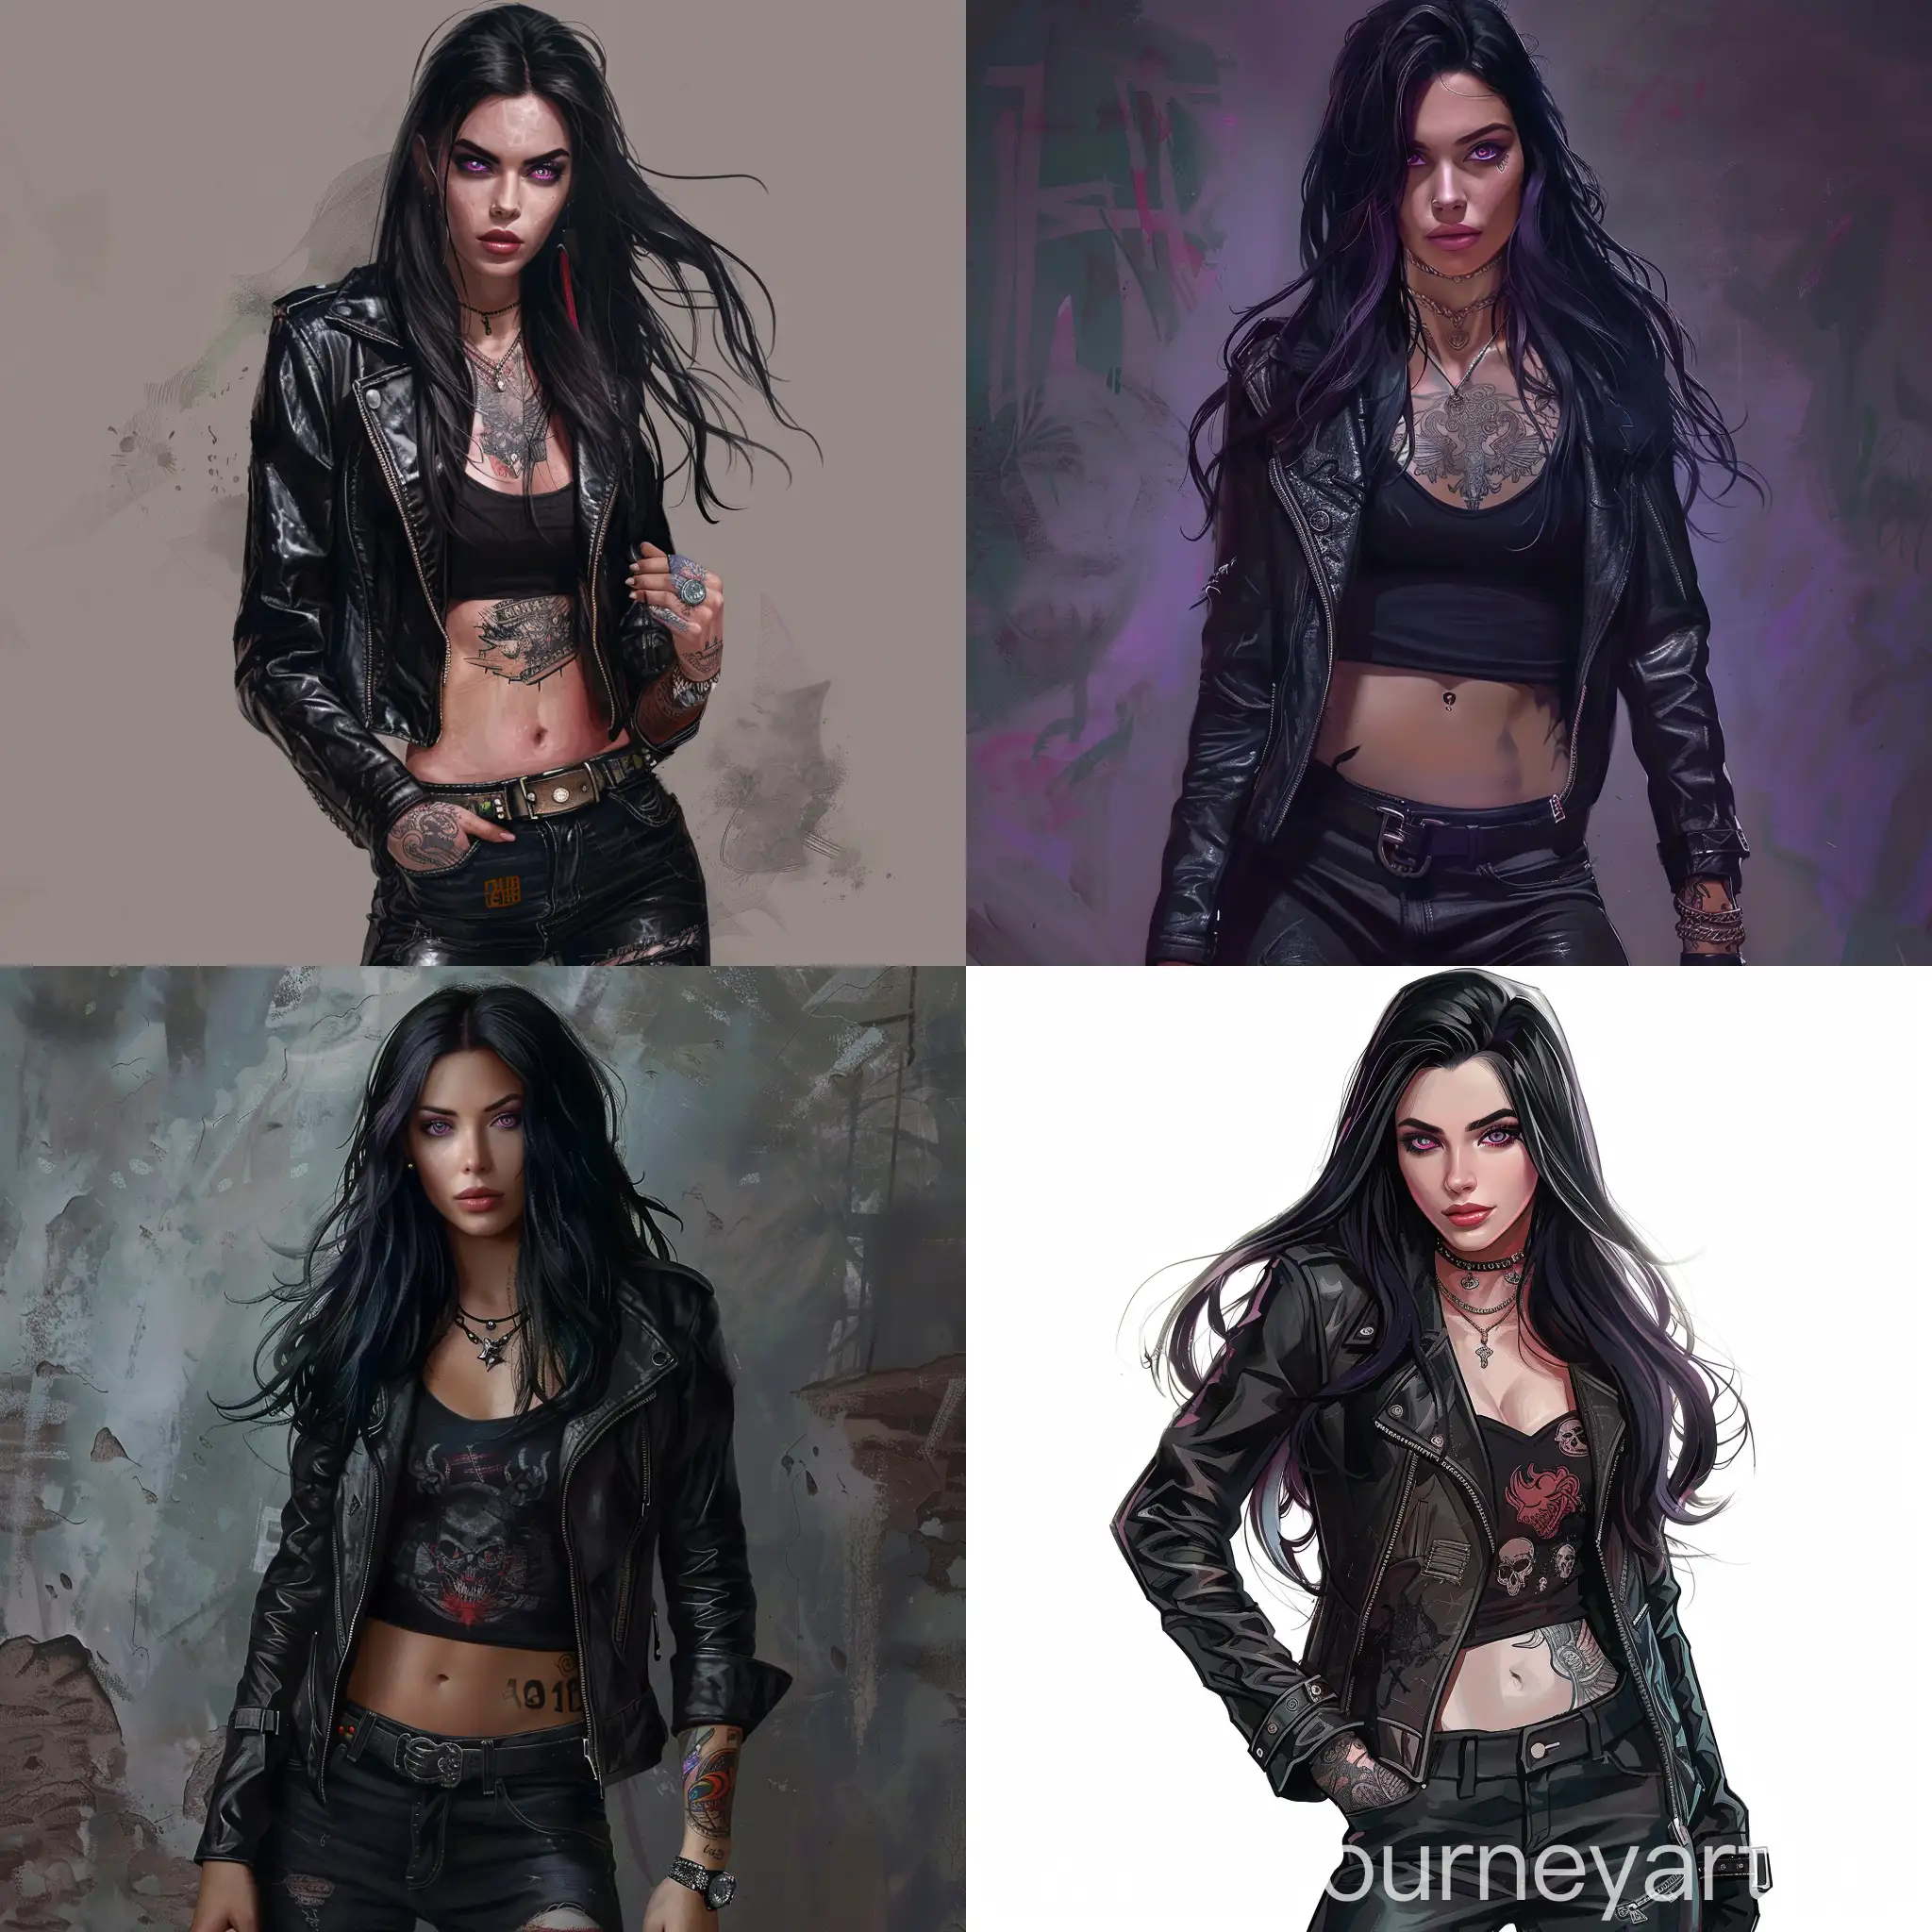 Muscular-Woman-in-Rock-Band-Outfit-with-Tattoos-and-Leather-Jacket